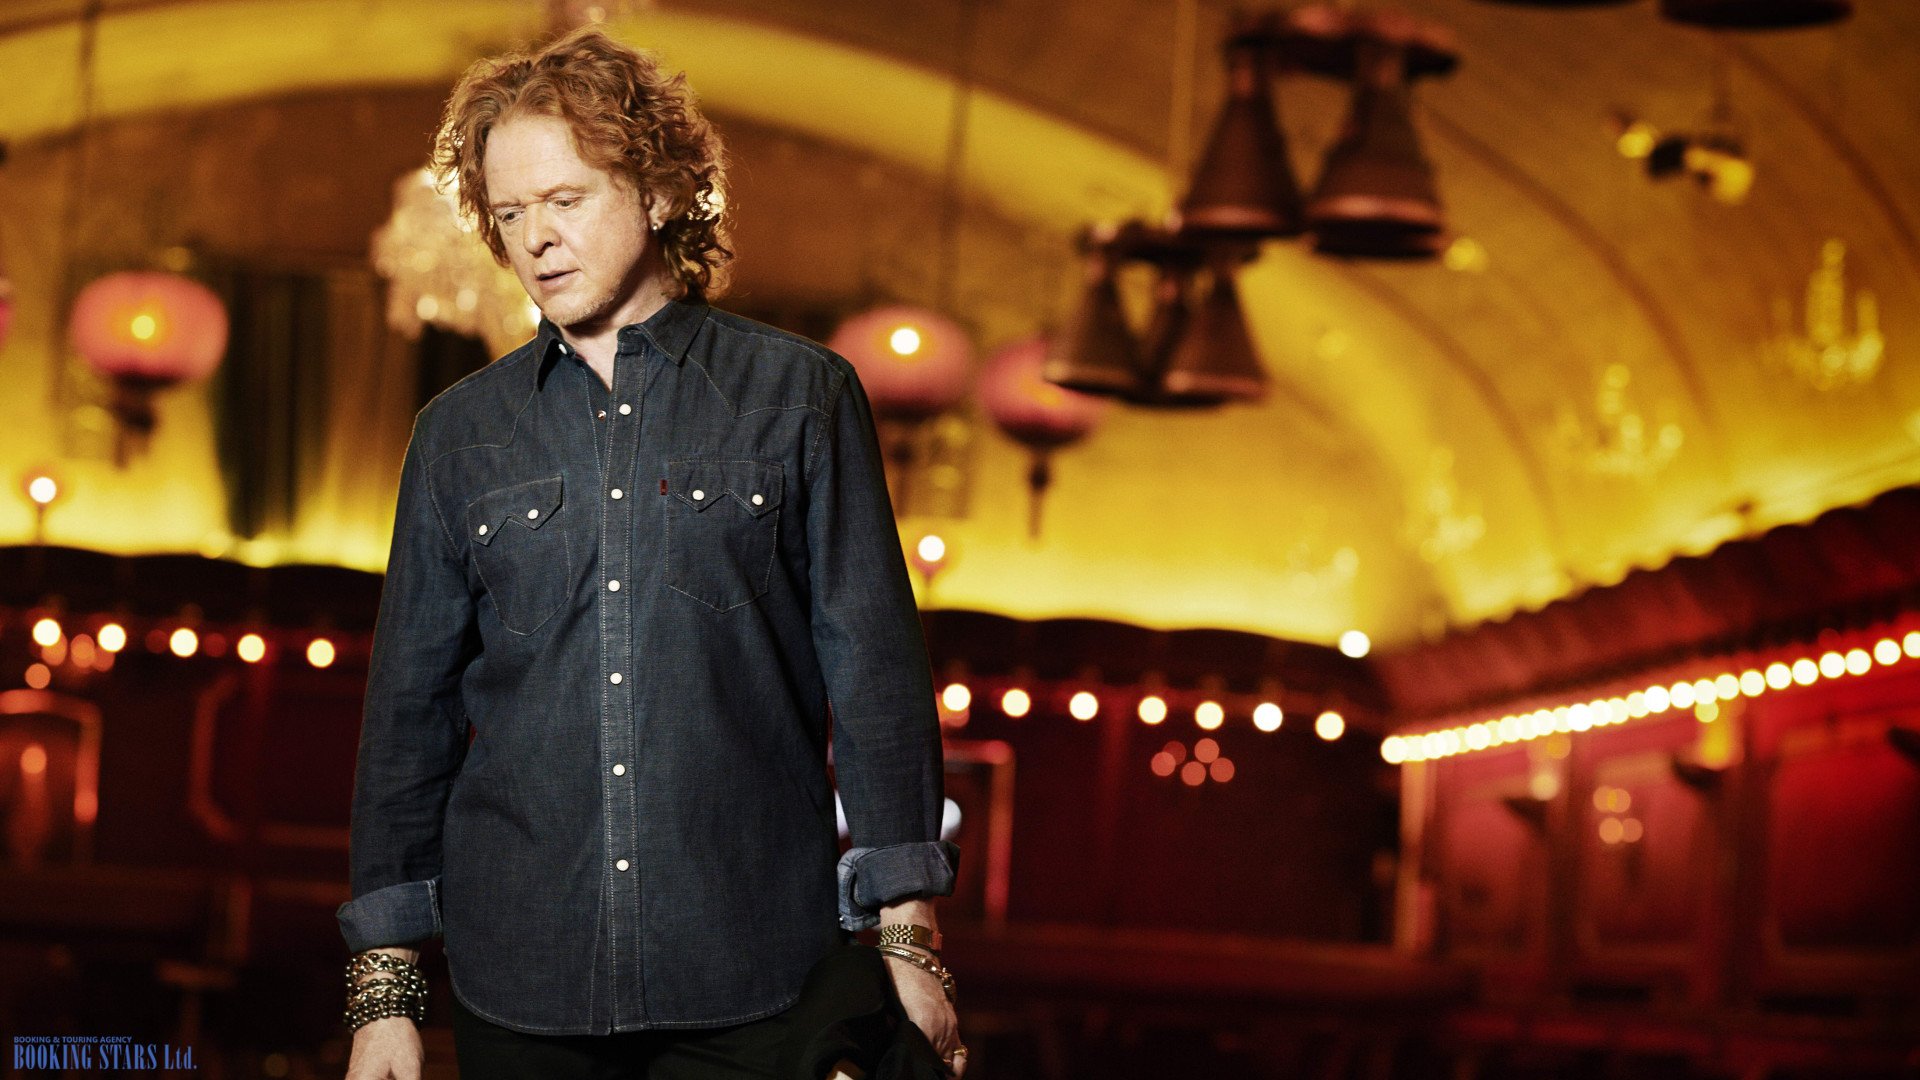 Booking Stars Ltd Booking And Touring Agency Simply Red 